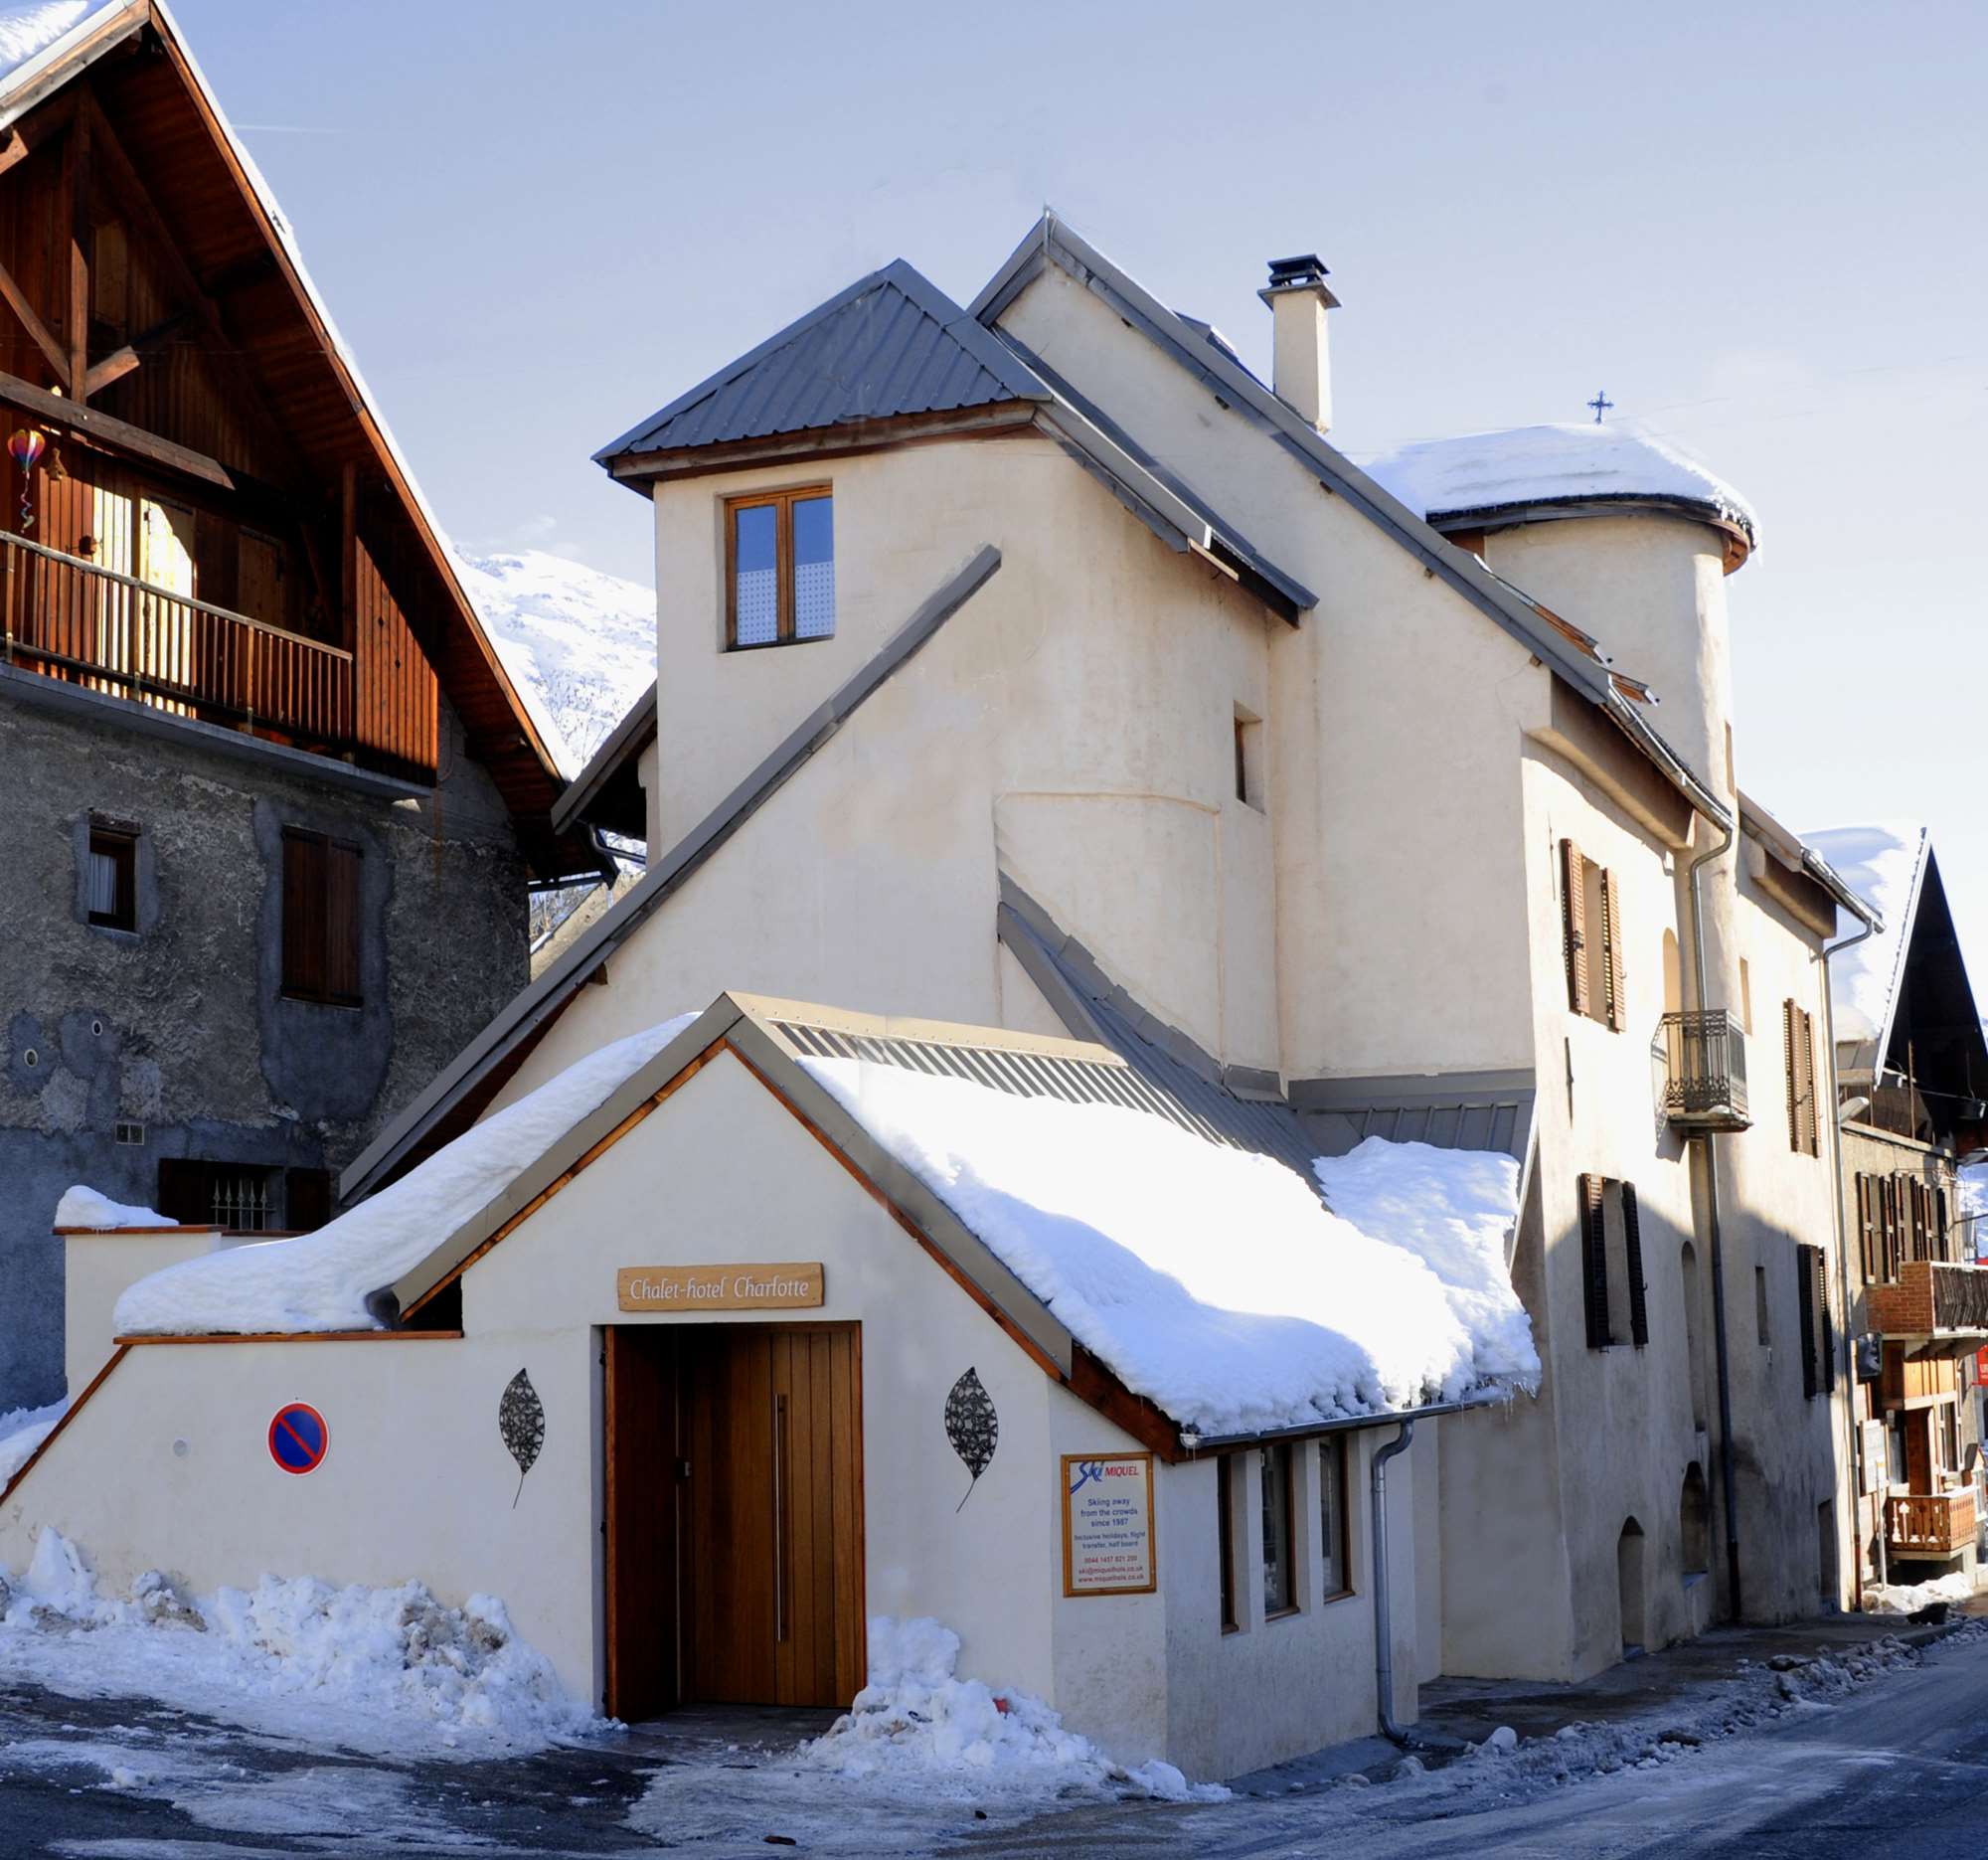 The Chalet-Hotel Charlotte in Monetier